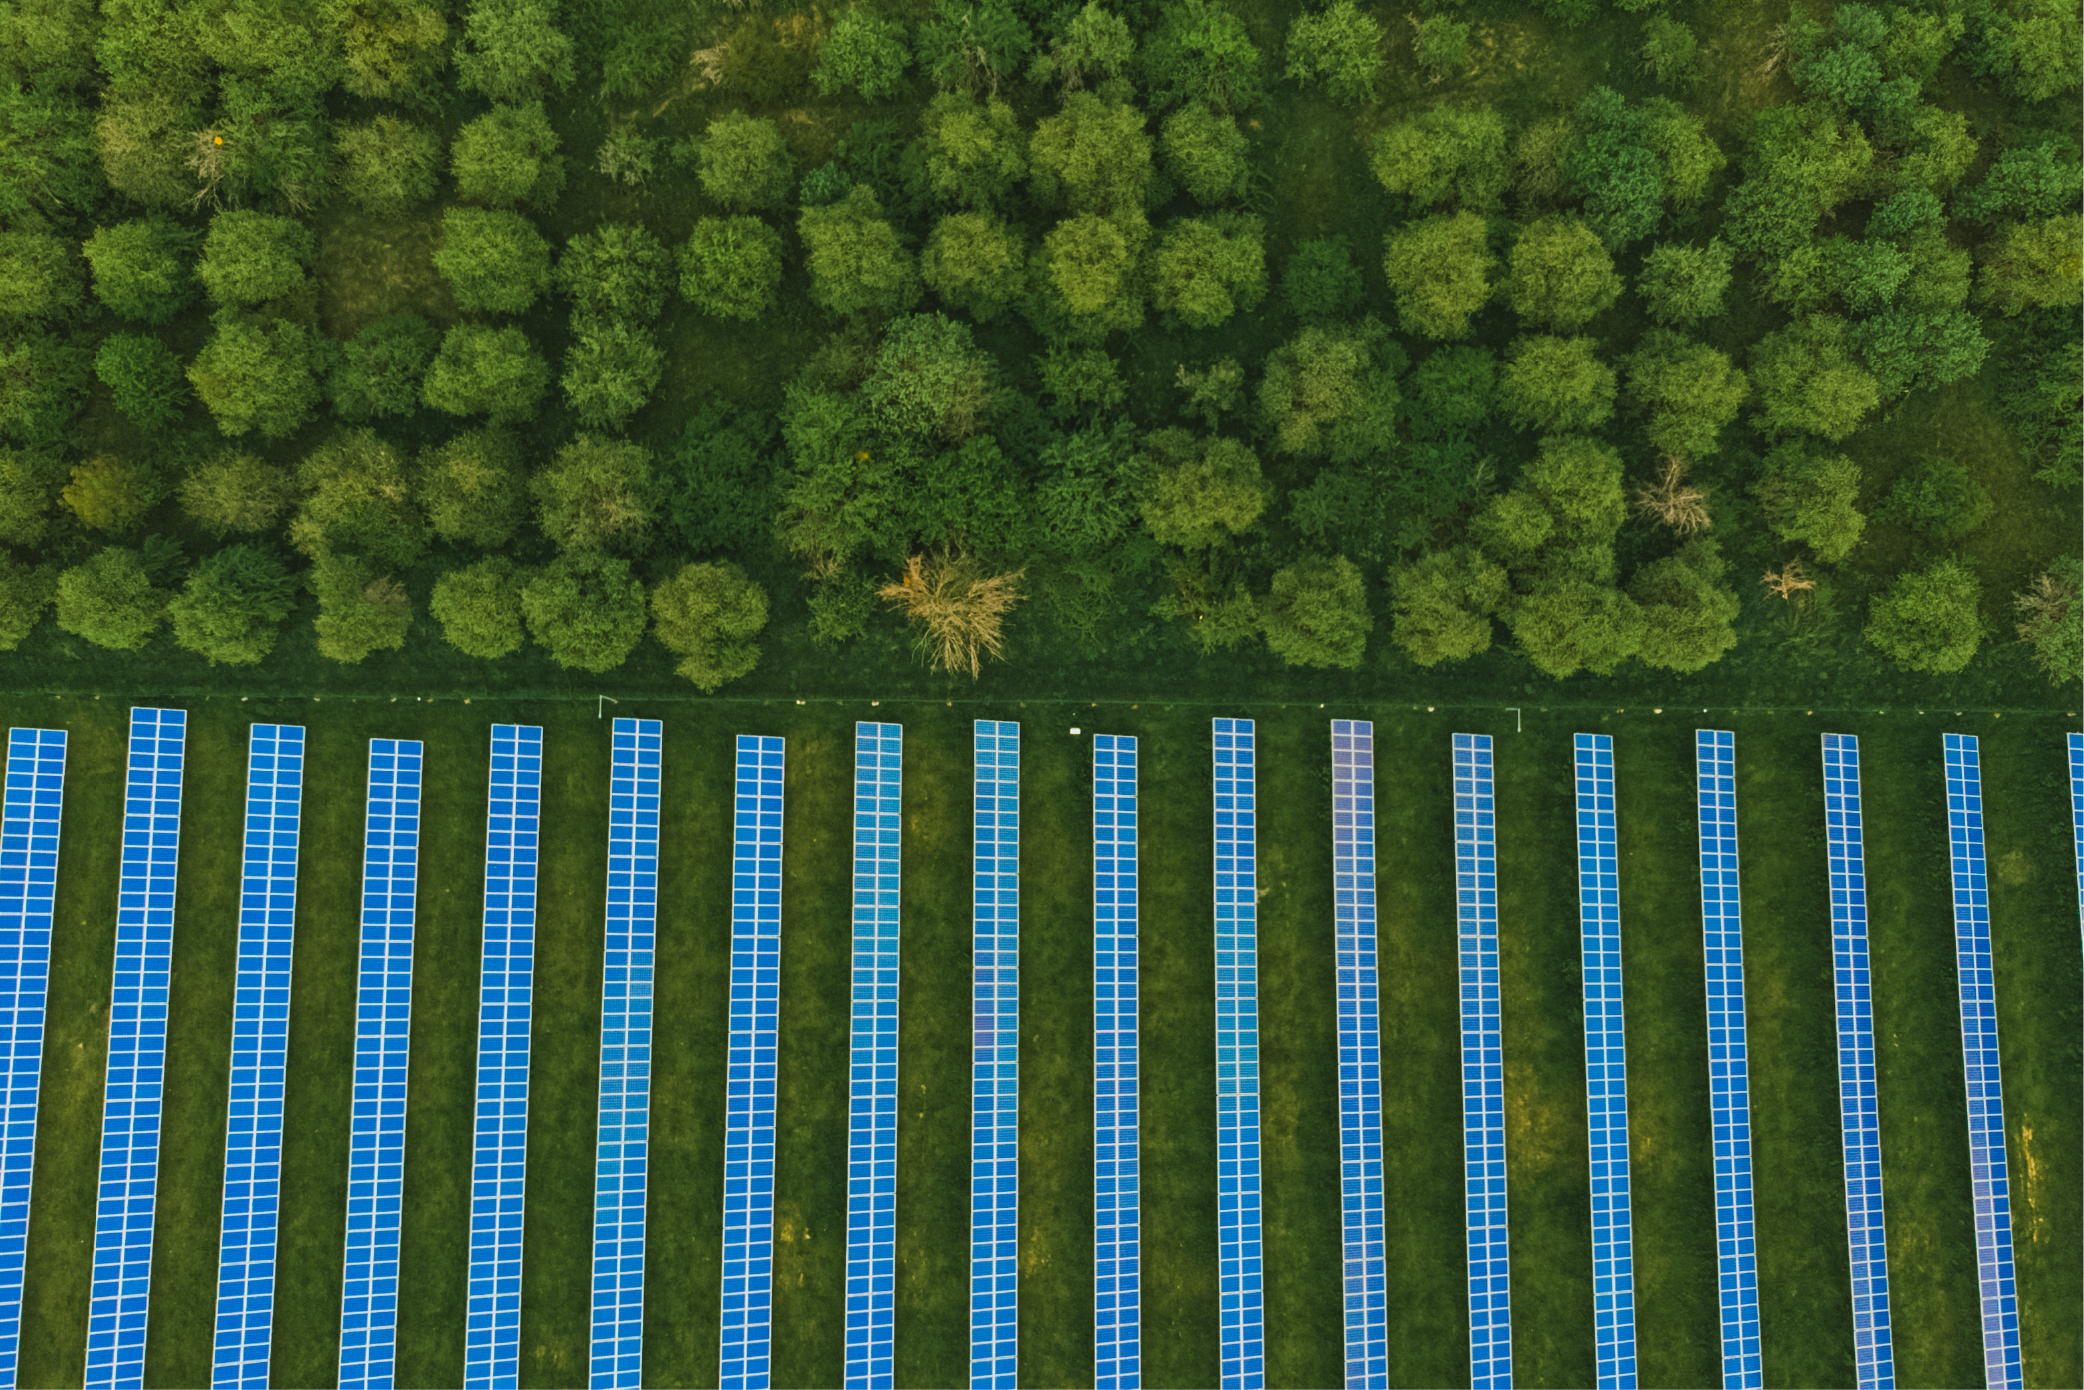 A field of blue solar panels in rows sits below a forest of green trees